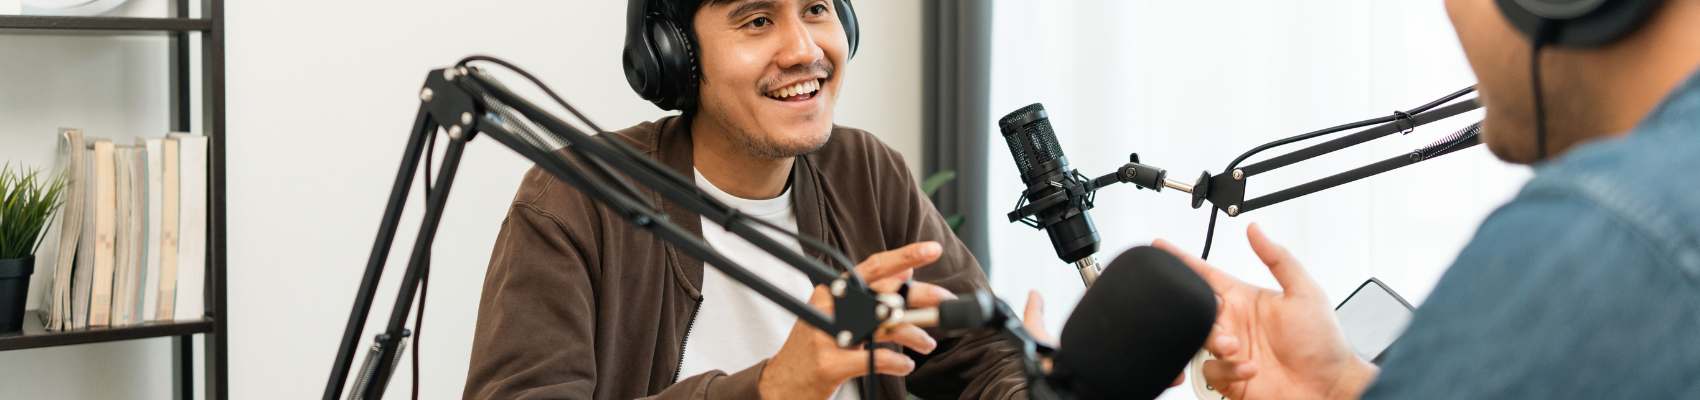 picture of two people talking in a recording study using microphones